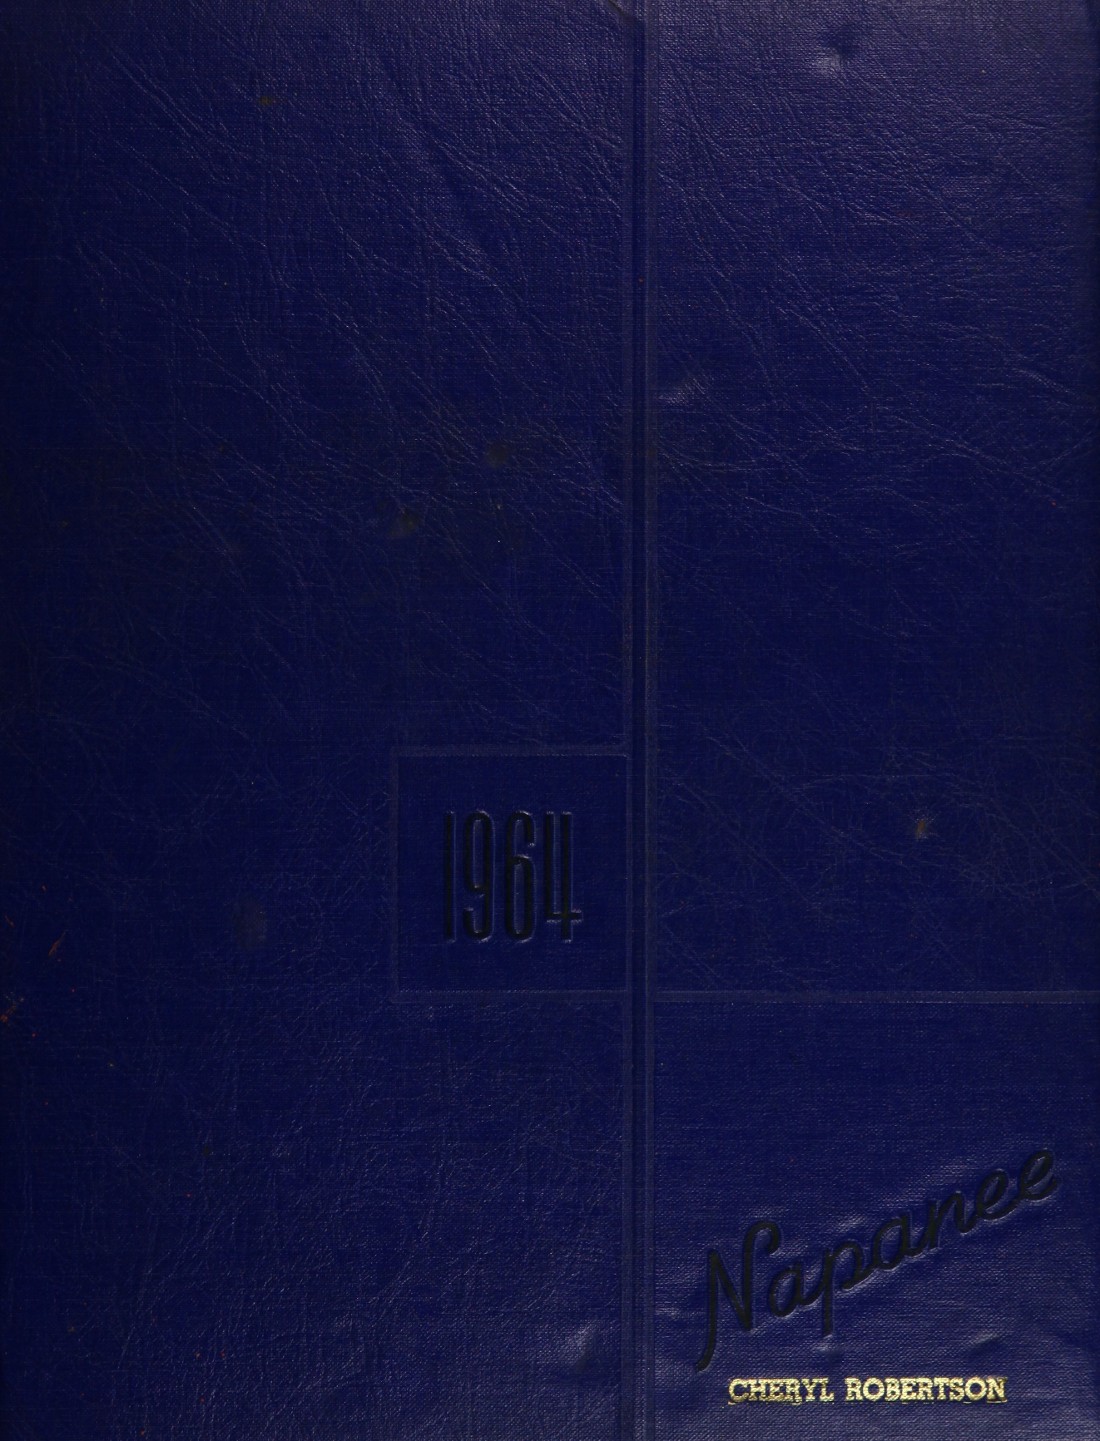 1964 yearbook from Napa High School from Napa, California